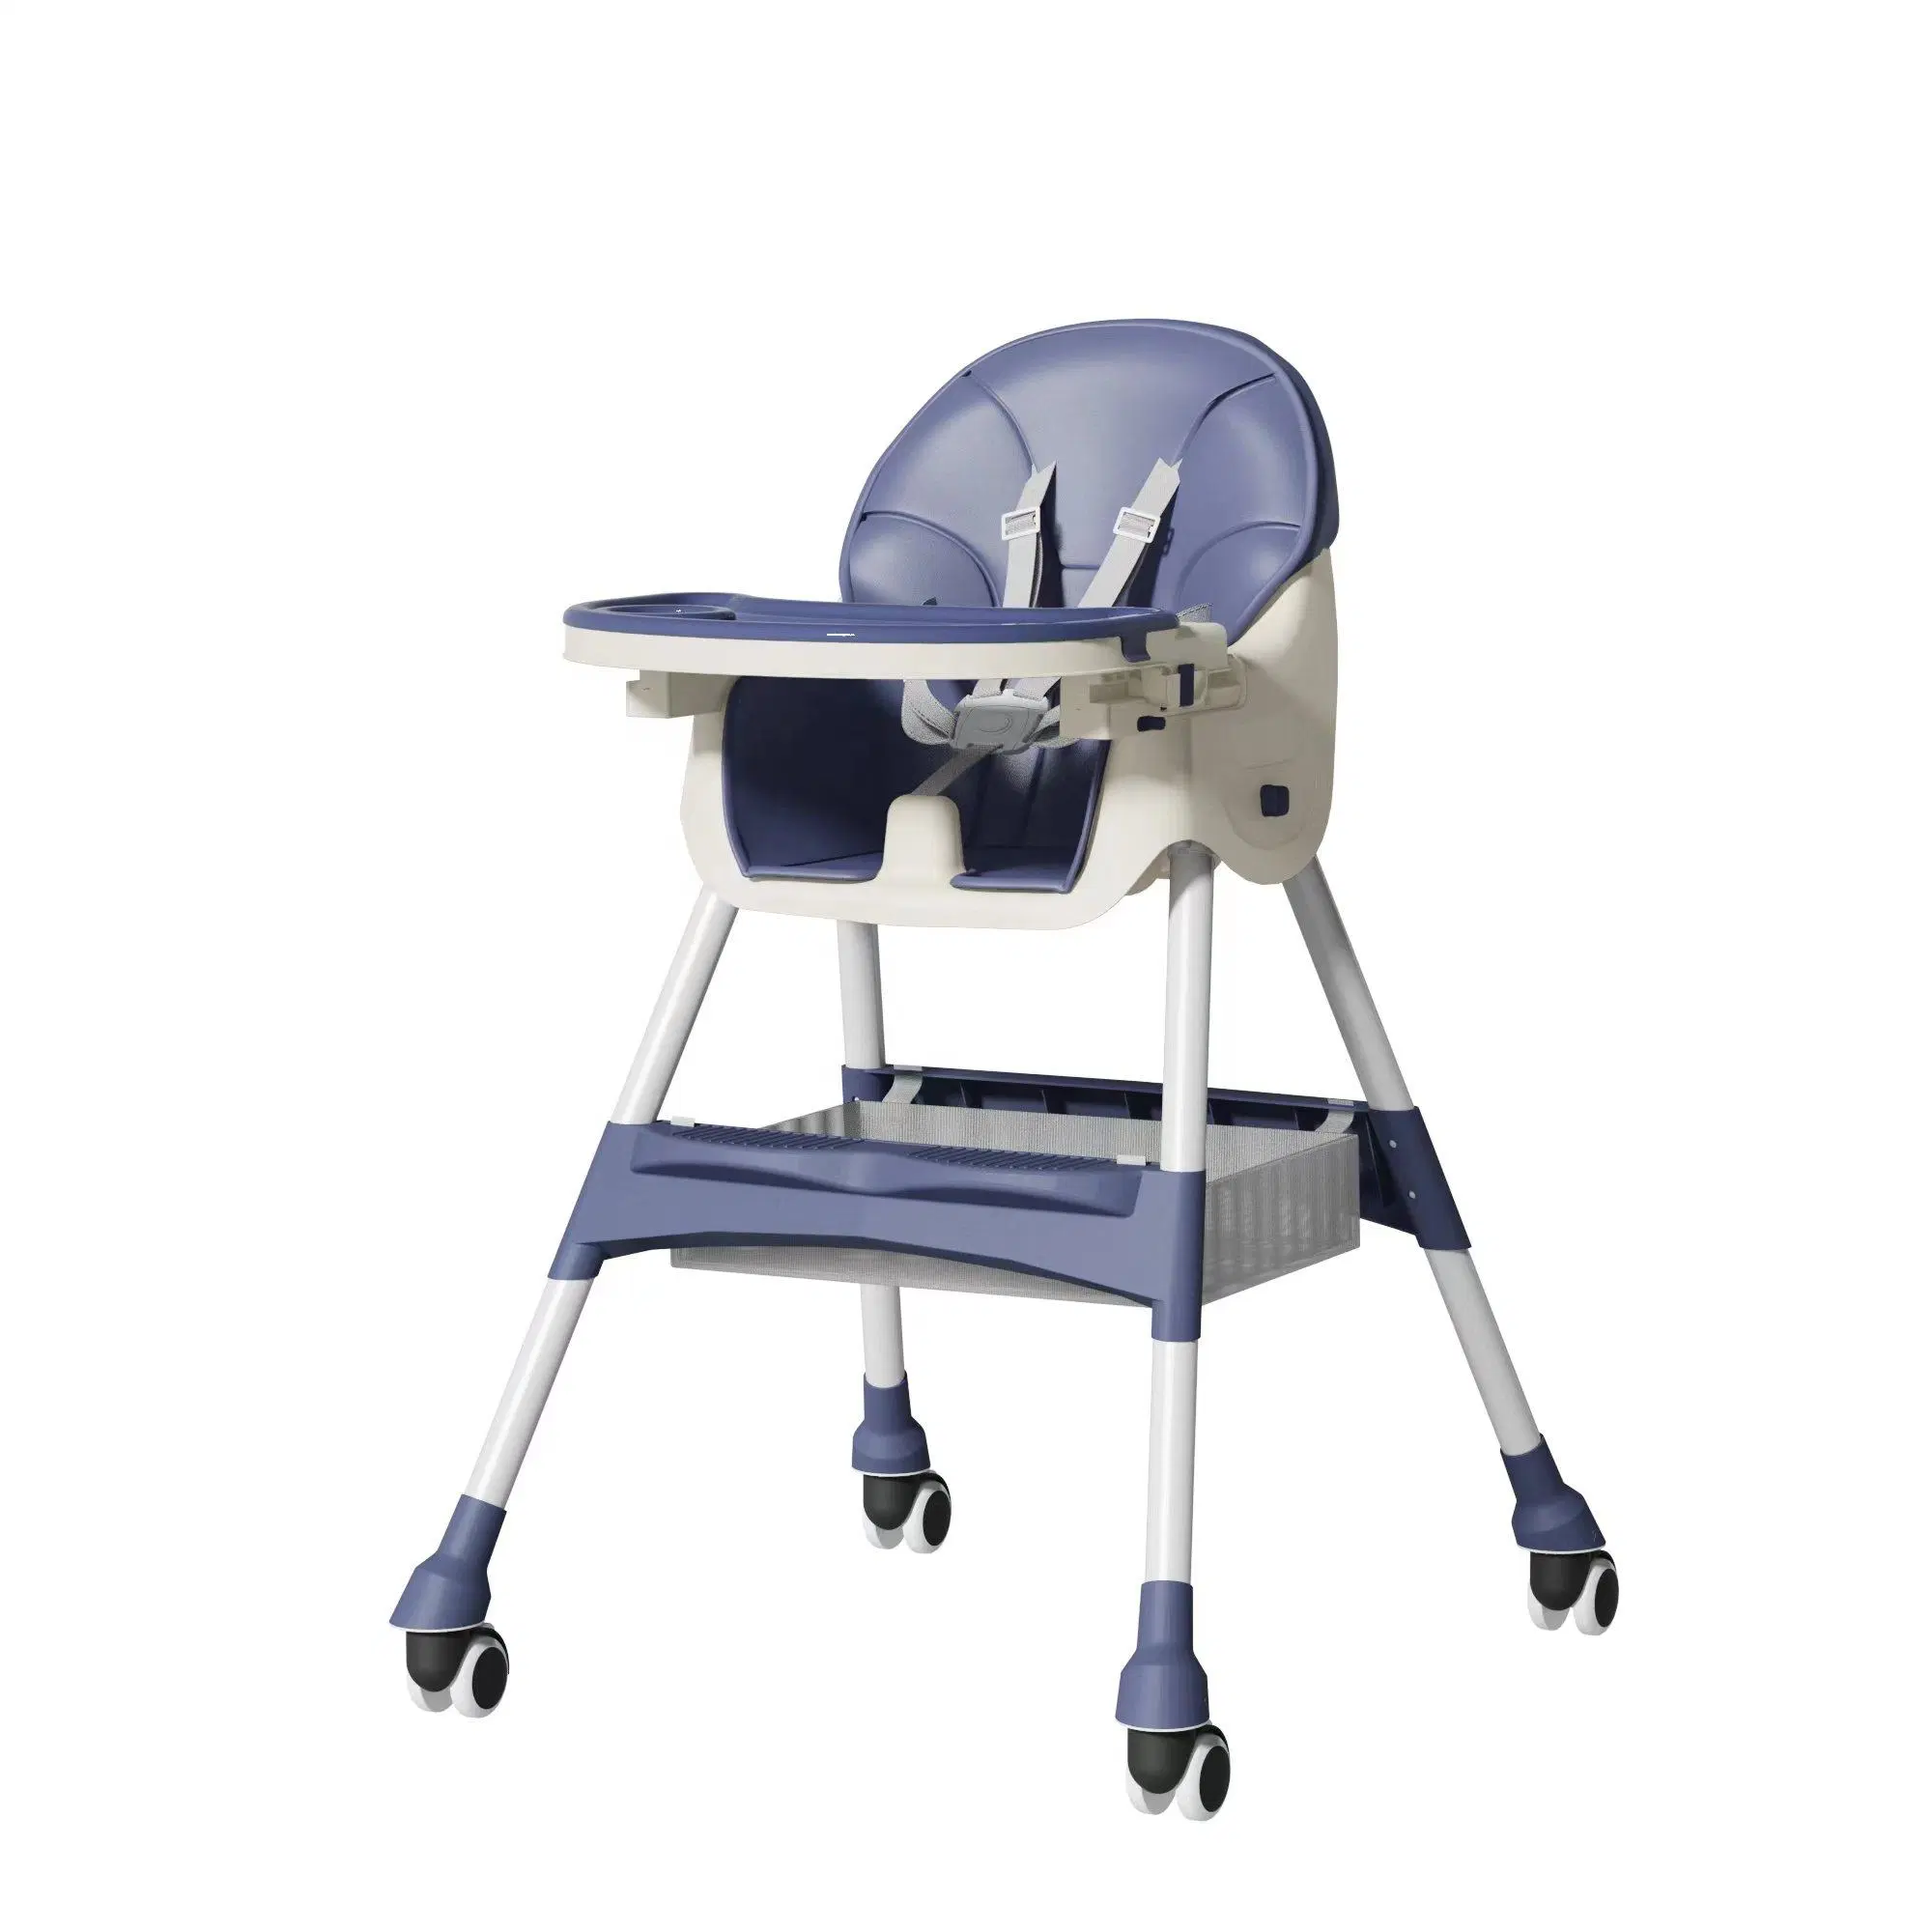 2023 New Baby Dining Chair, Multi-Functional Folding Children's Dining Chair, Height Adjustment, Plate Seat Distance Can Be Adjusted to Accommodate Children Fee